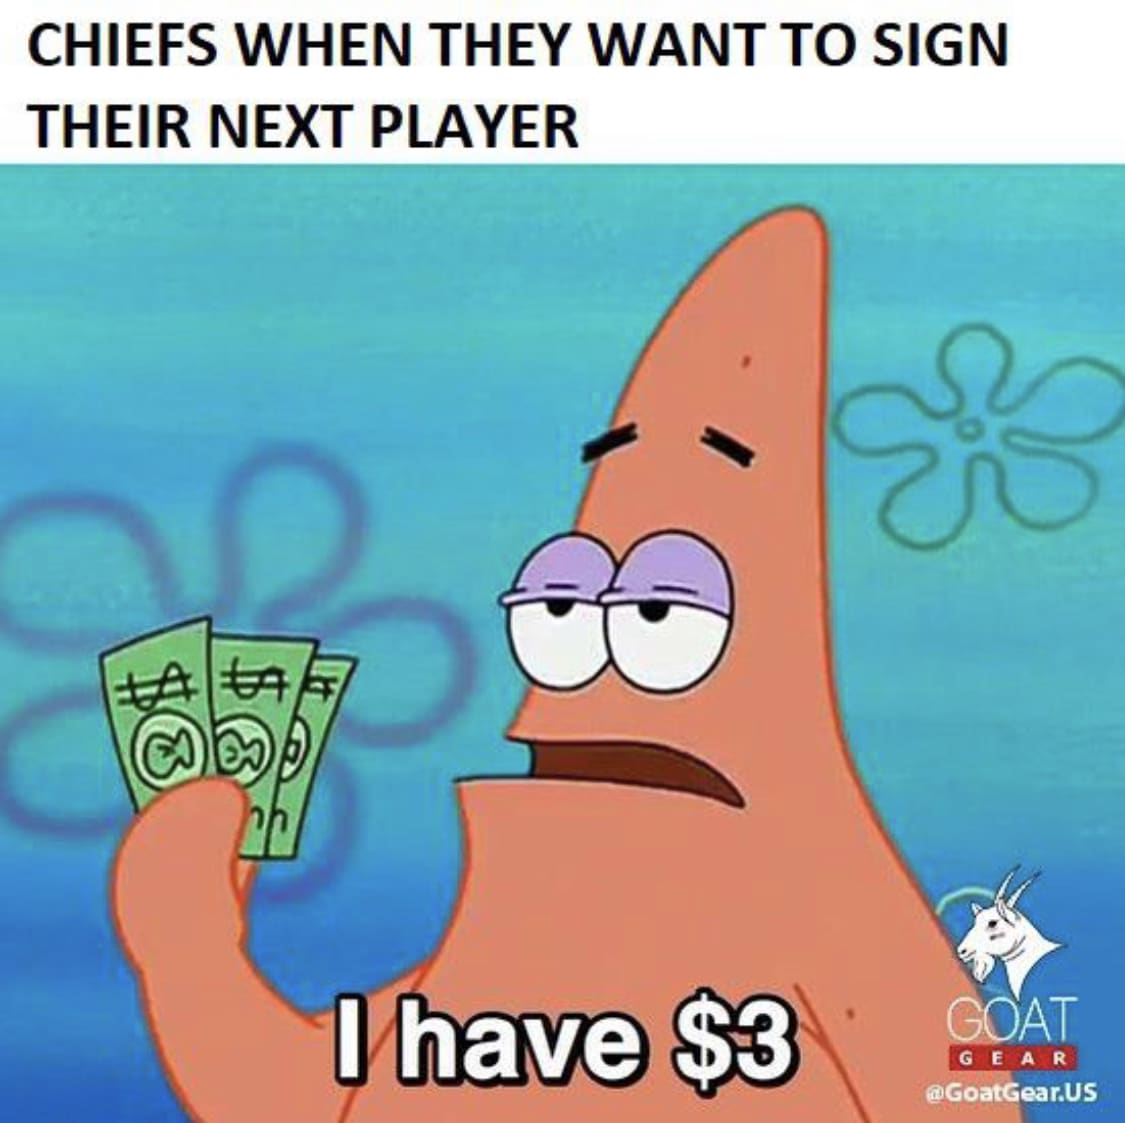 Spongebob, Any NFL Spongebob Memes Spongebob, Any NFL text: CHIEFS WHEN THEY WANT TO SIGN THEIR NEXT PLAYER '(have $3 \ GOAT 